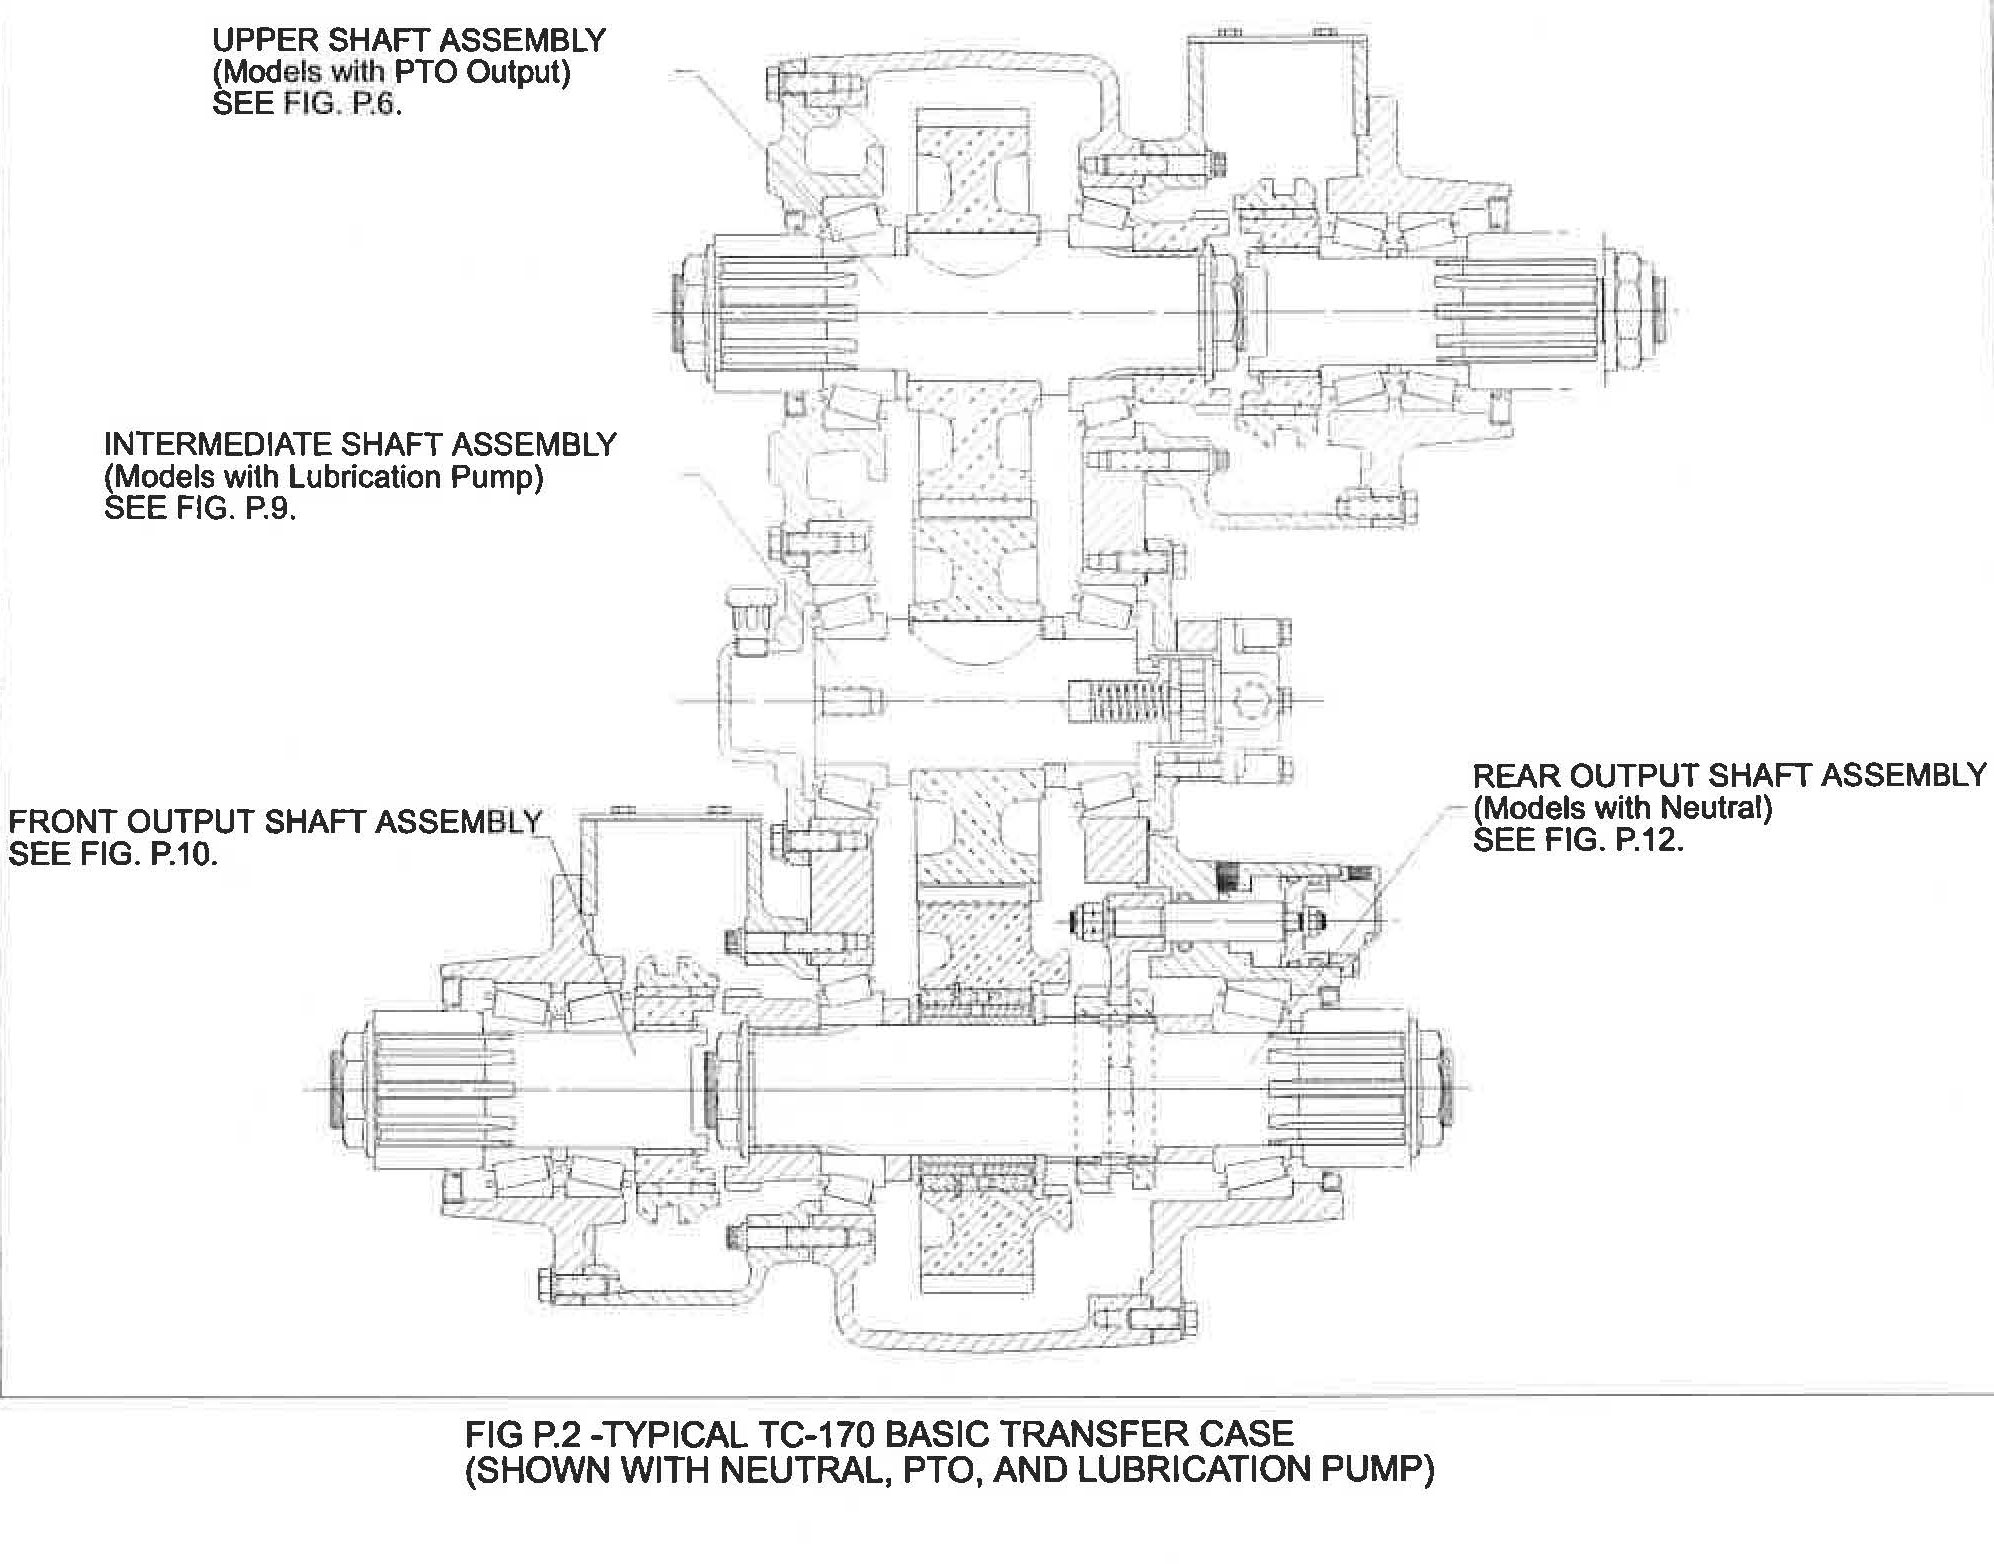 Fabco TC170 Transfer Case Configurations shown with neutral, PTO, and lubrication pump